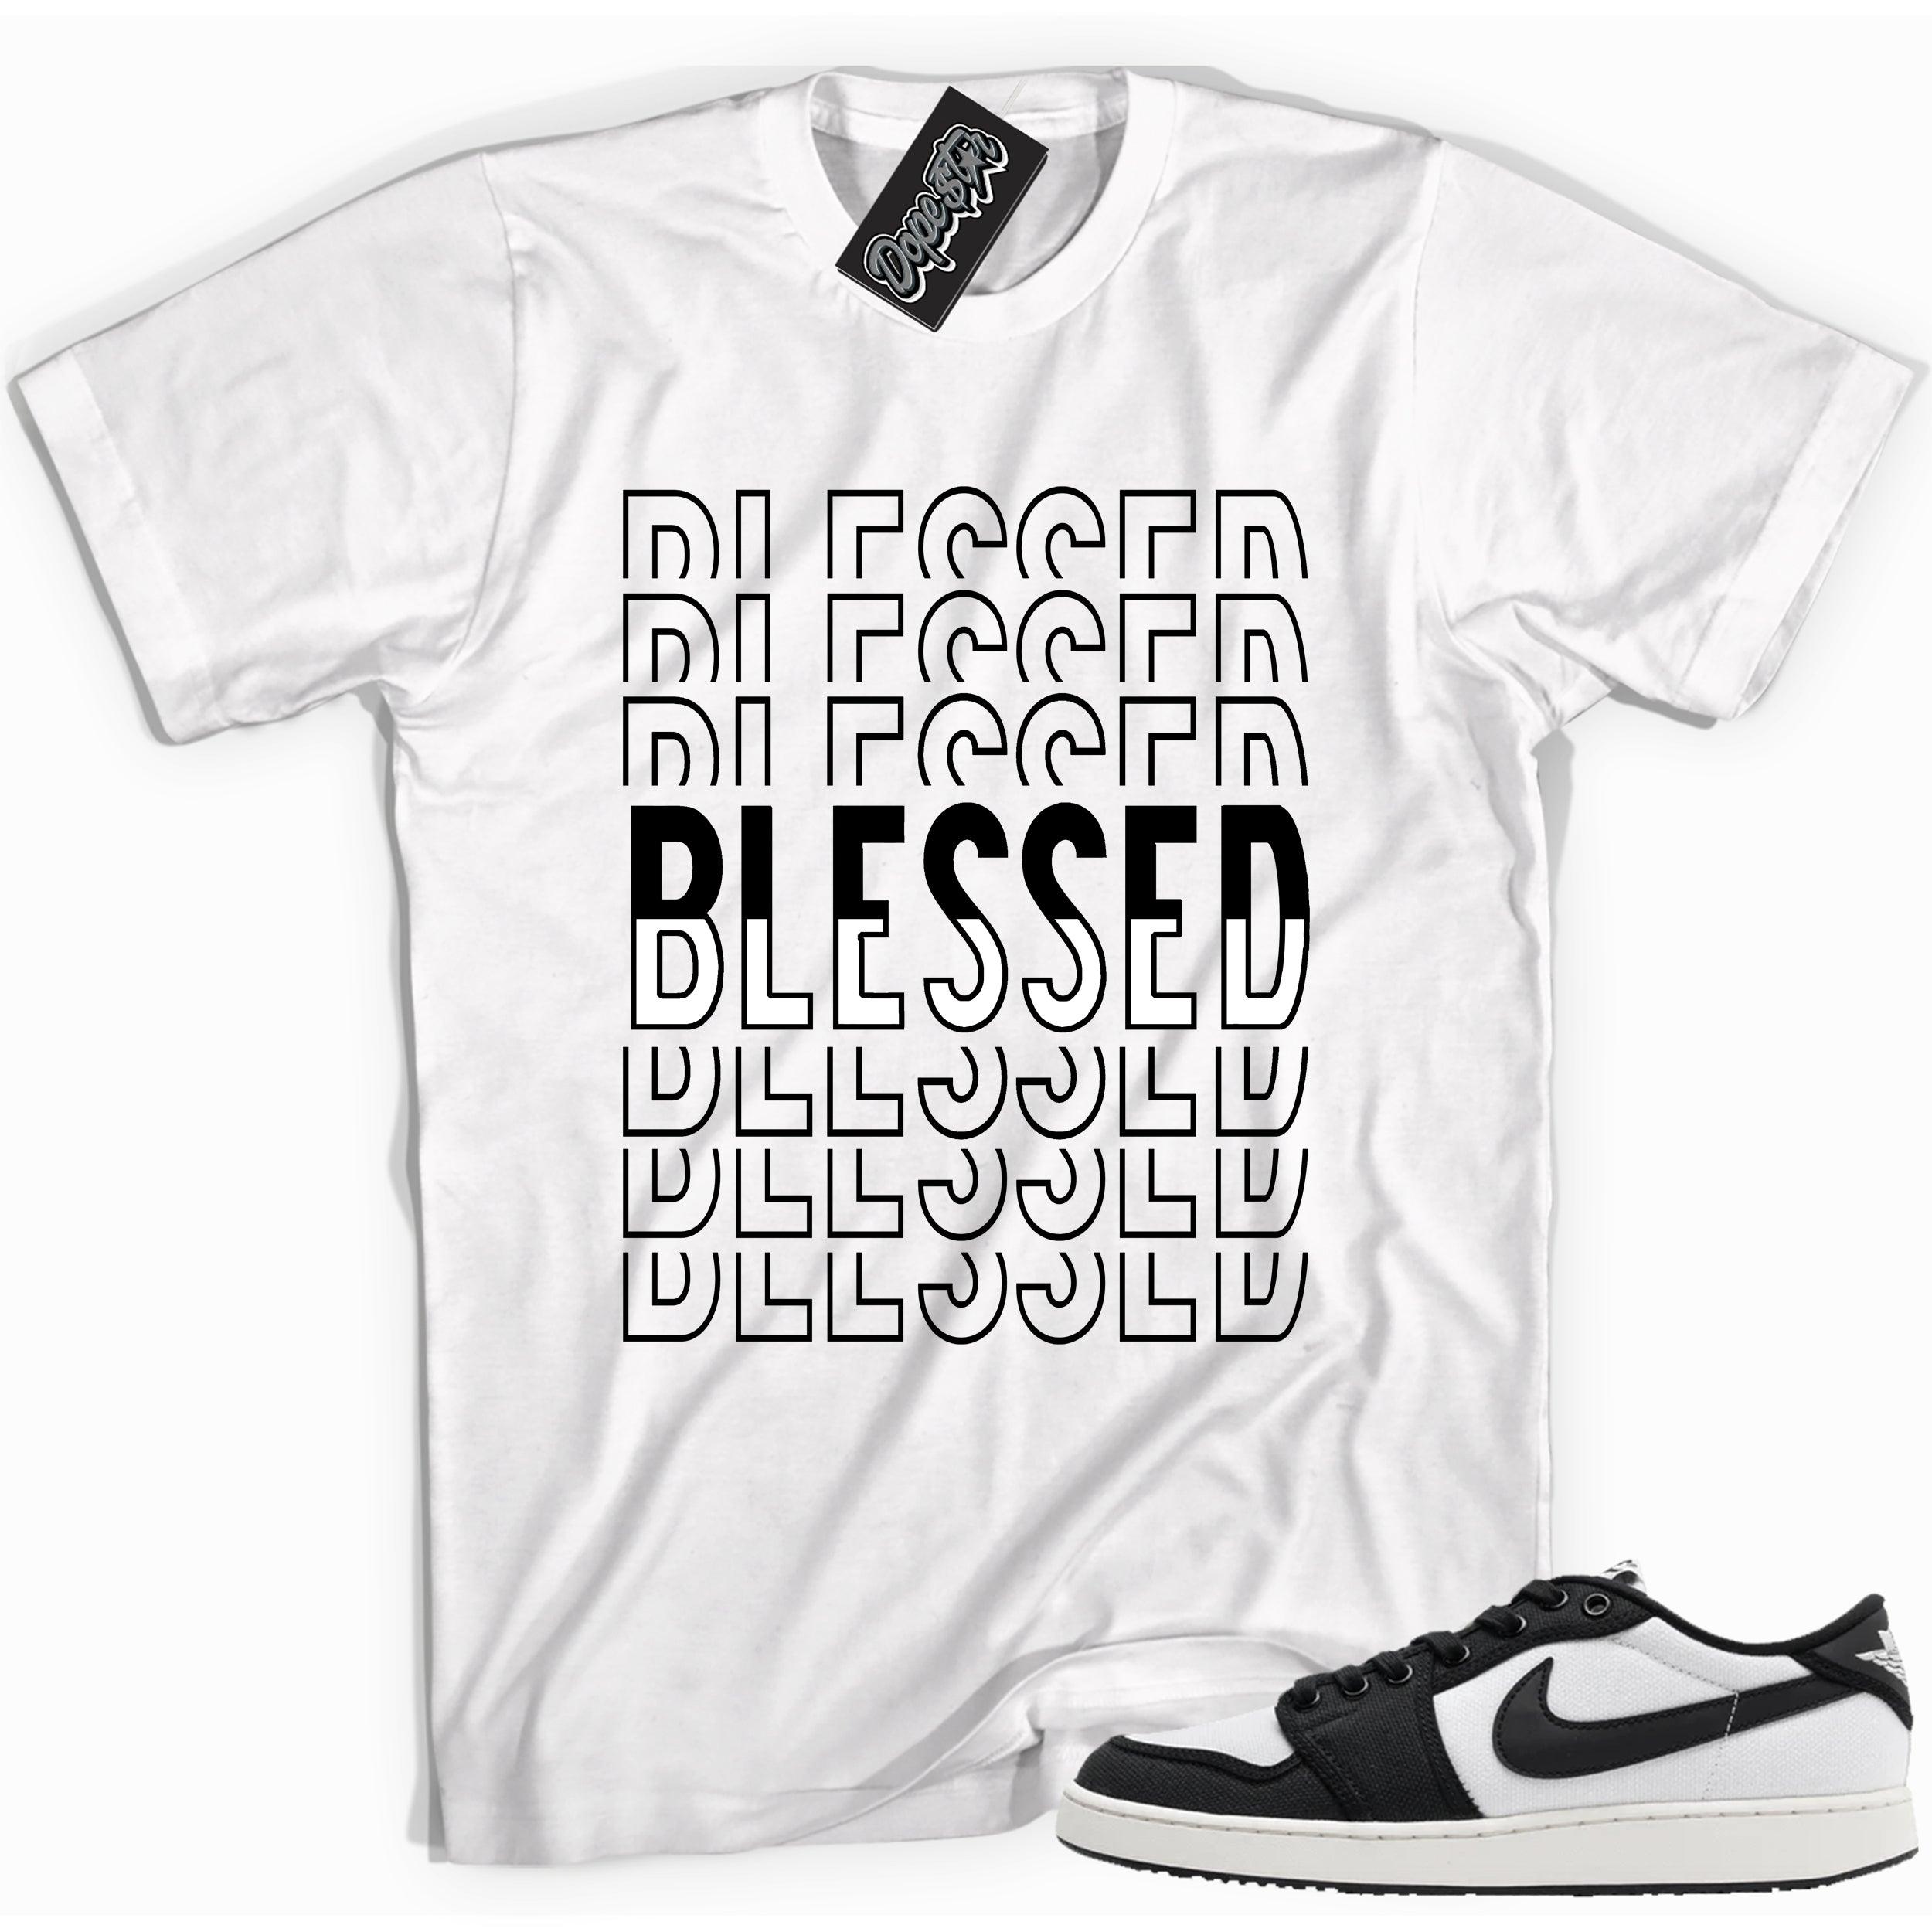 Cool white graphic tee with 'blessed' print, that perfectly matches Air Jordan 1 Retro Ajko Low Black & White sneakers.